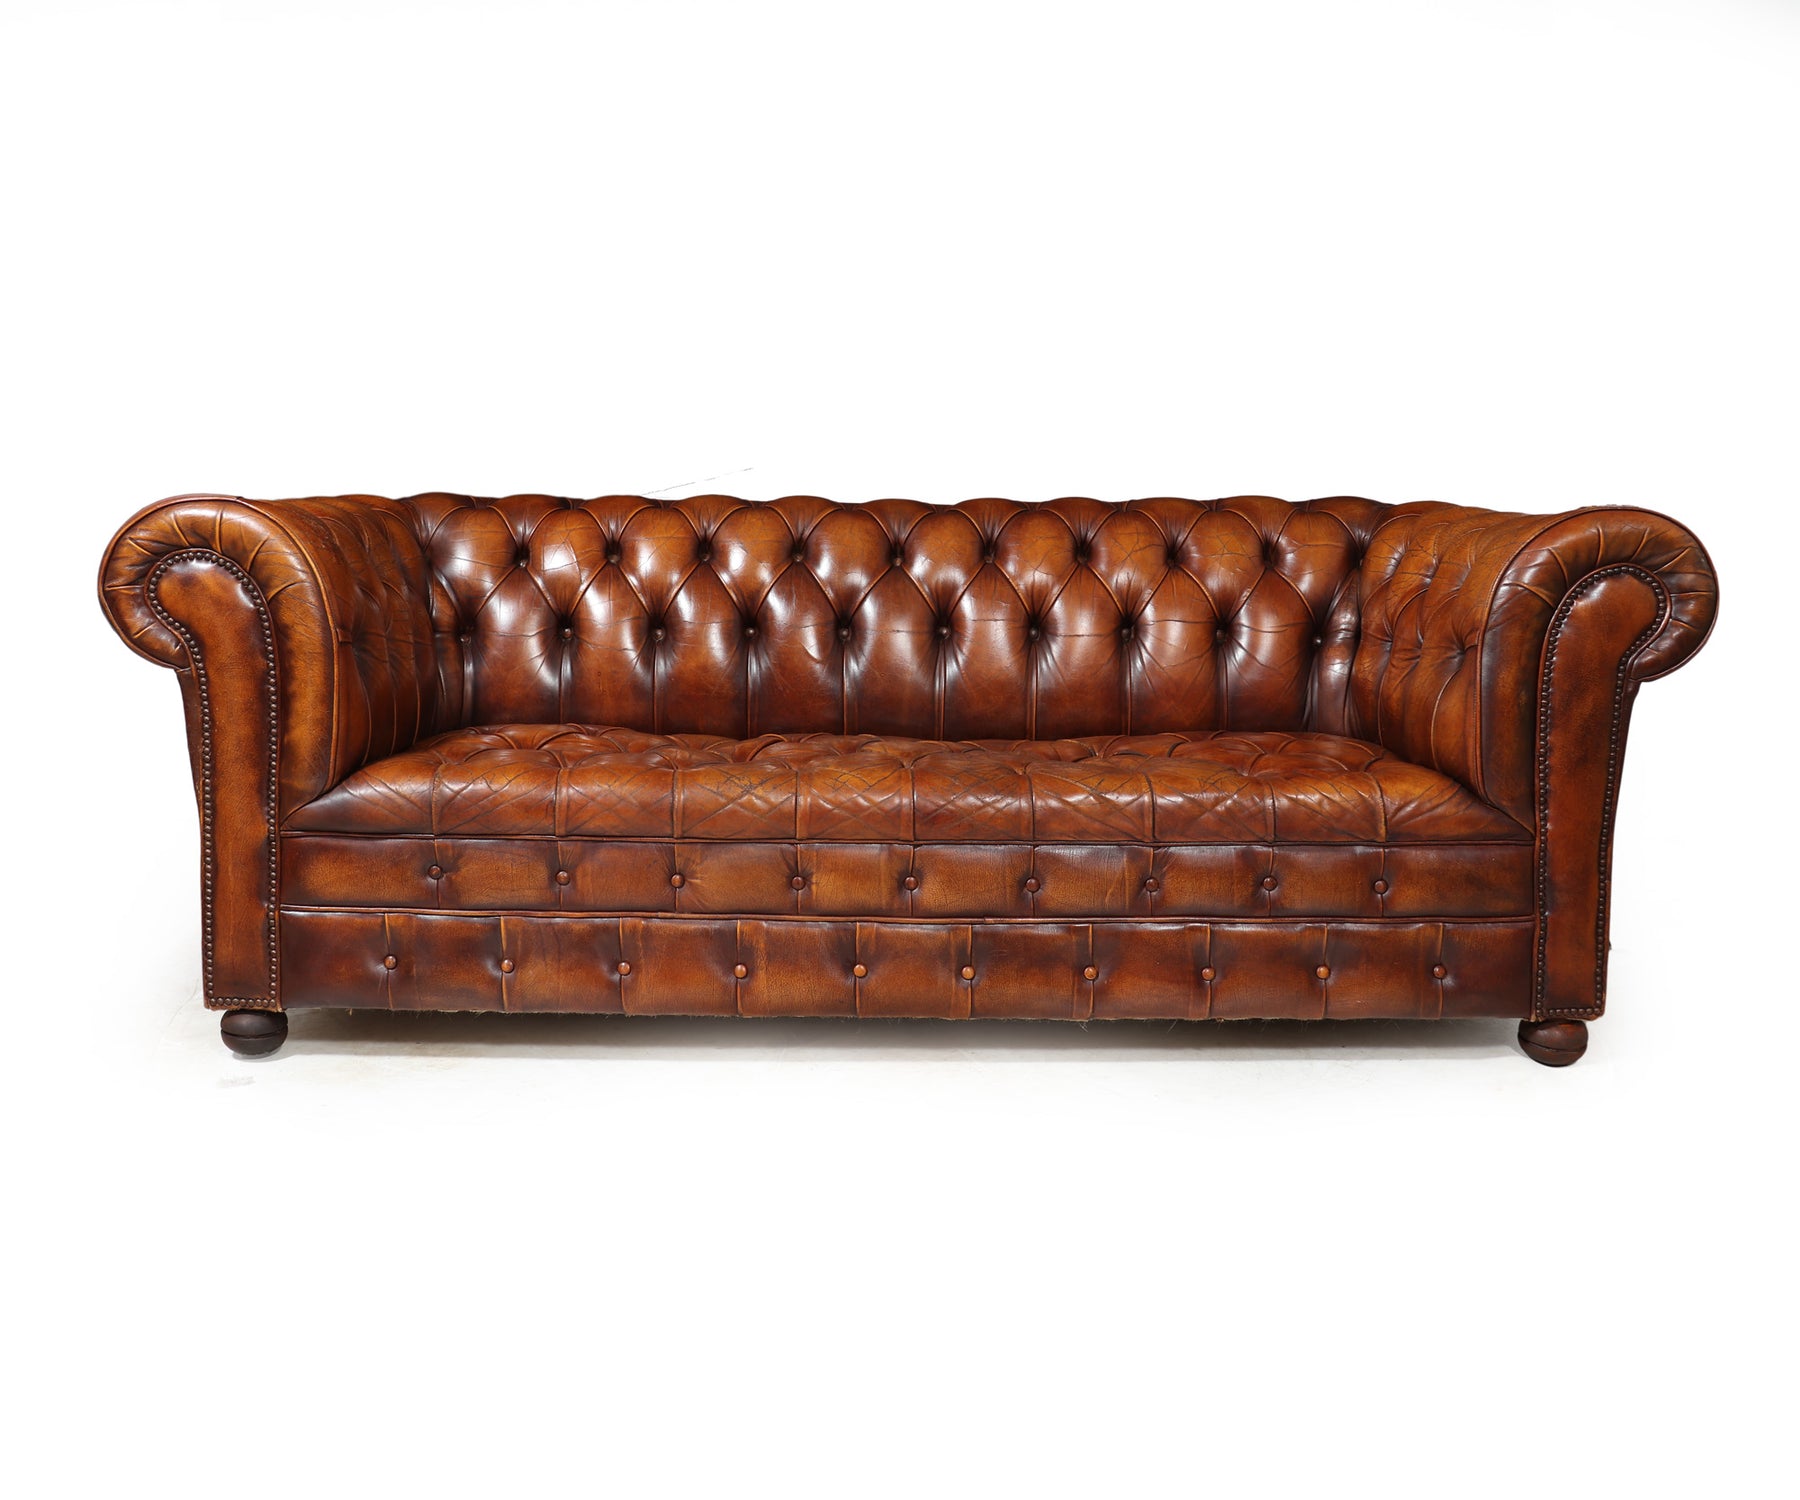 Vintage Leather Oned Chesterfield